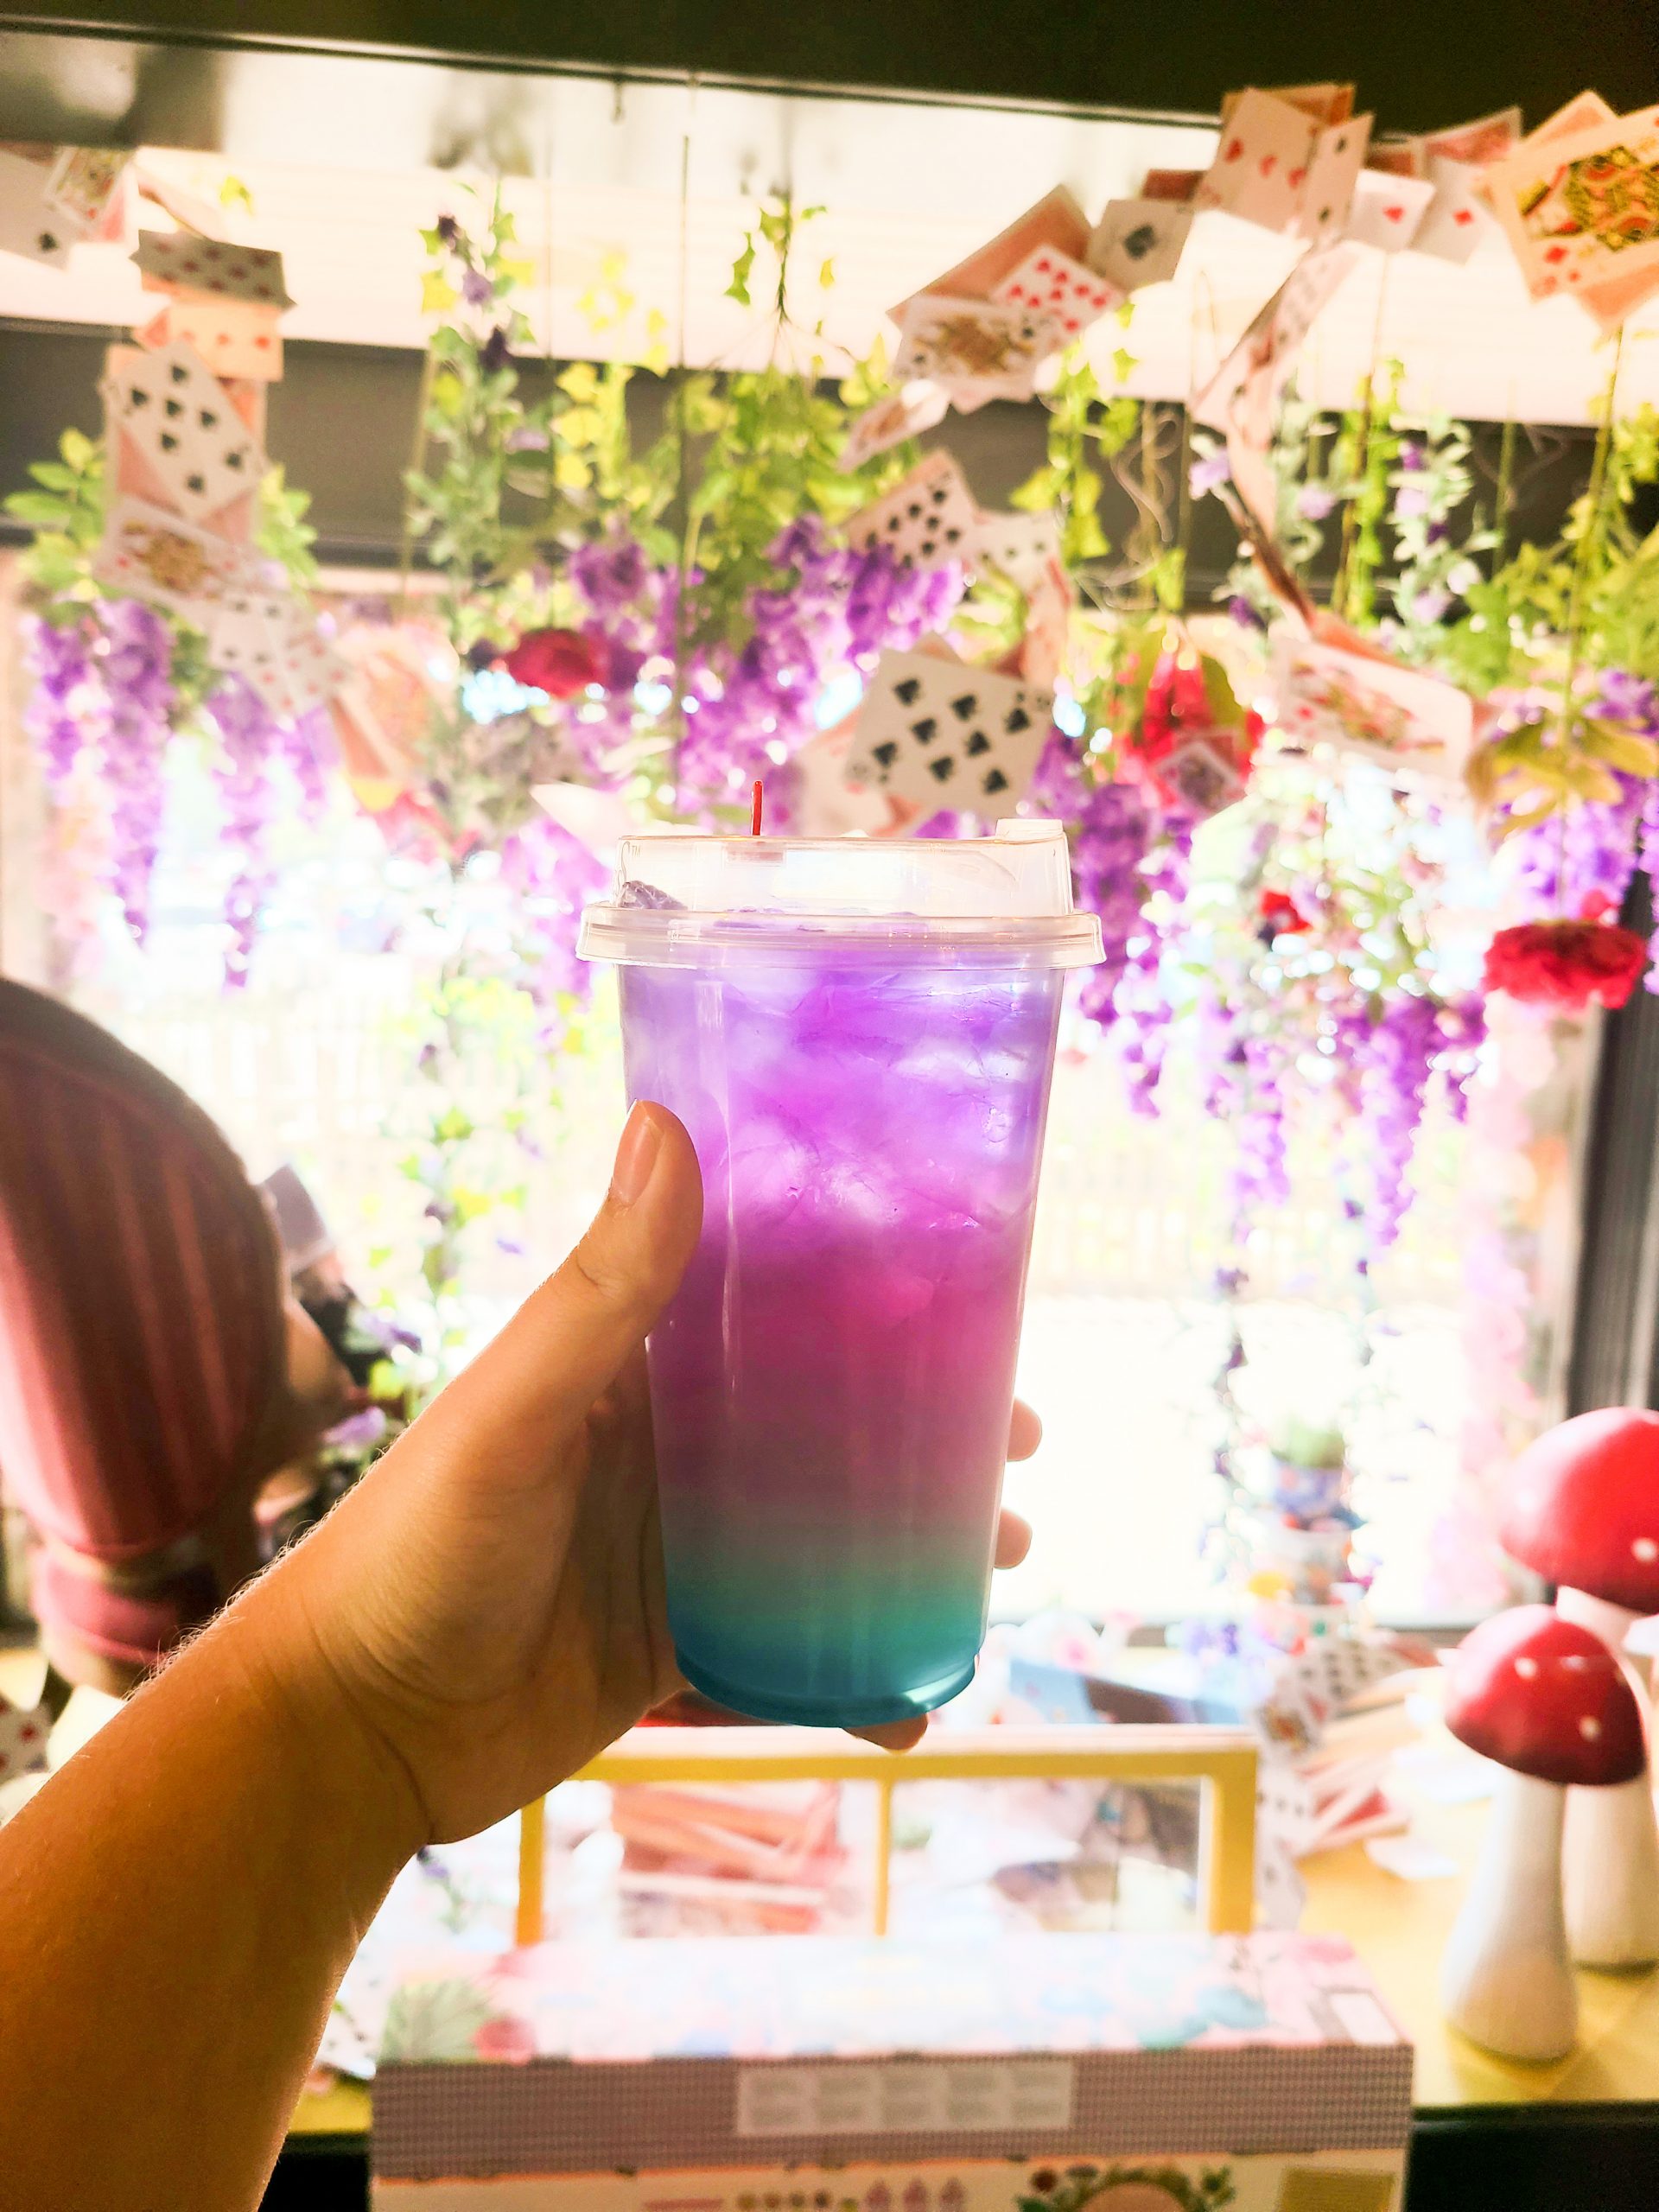 A colorful beverage held up against the backdrop of the Alice in Wonderland shop